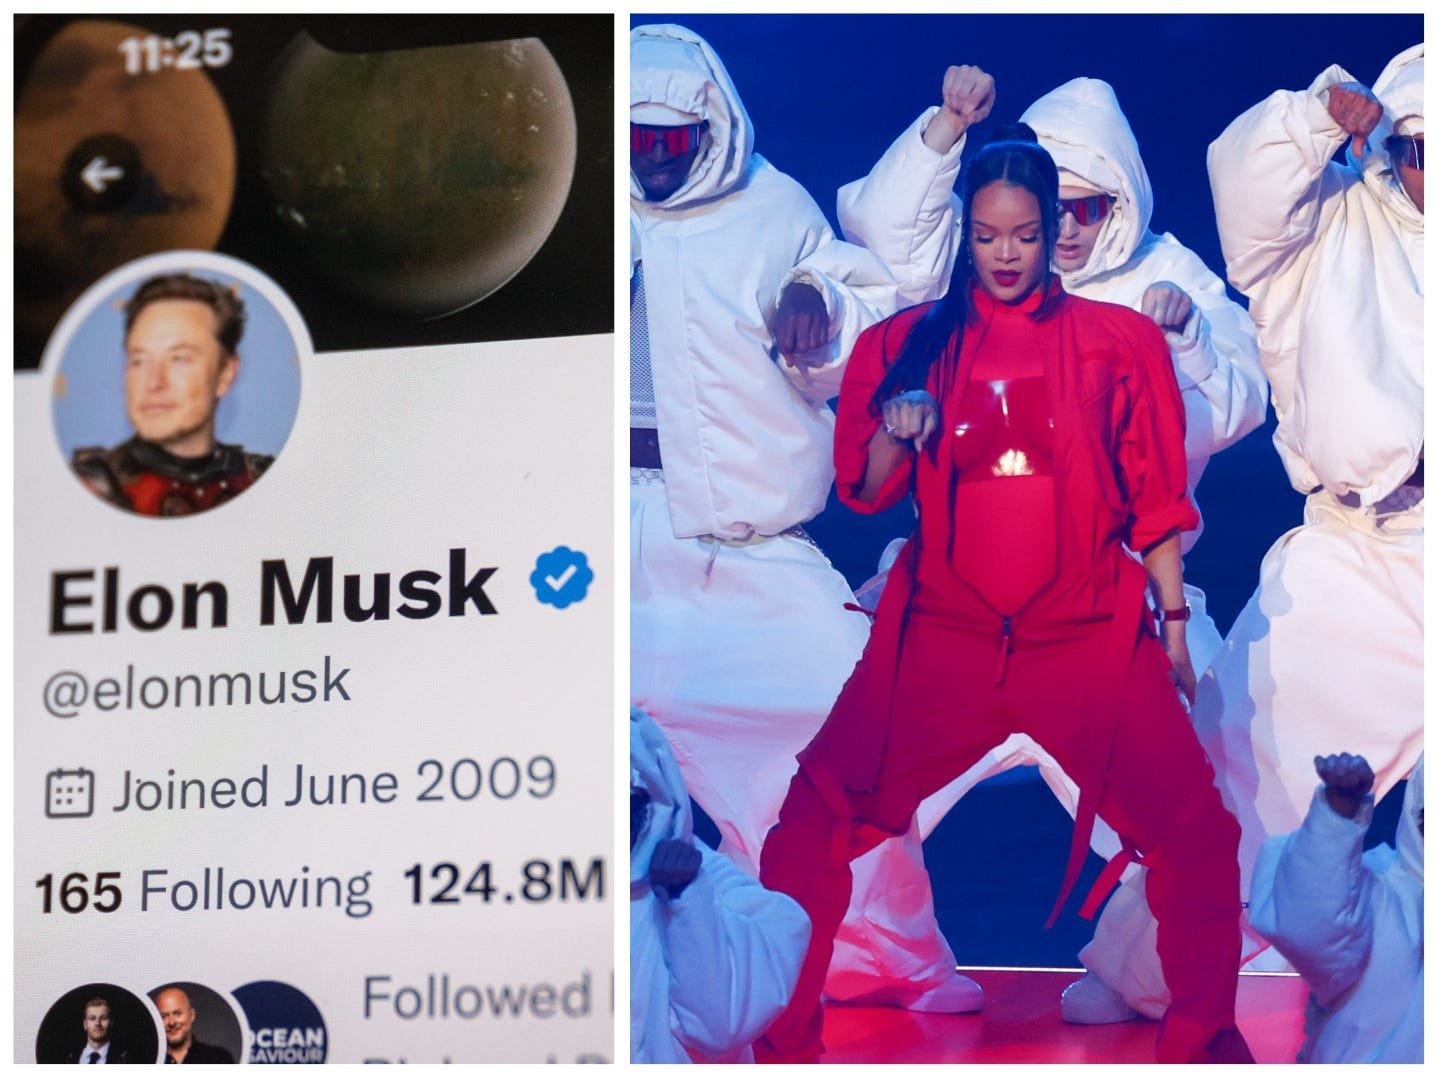 Twitter suffered a partial outage during Rihanna's Super Bowl halftime show — its 2nd outage in a week — despite Elon Musk's directive to maximize stability